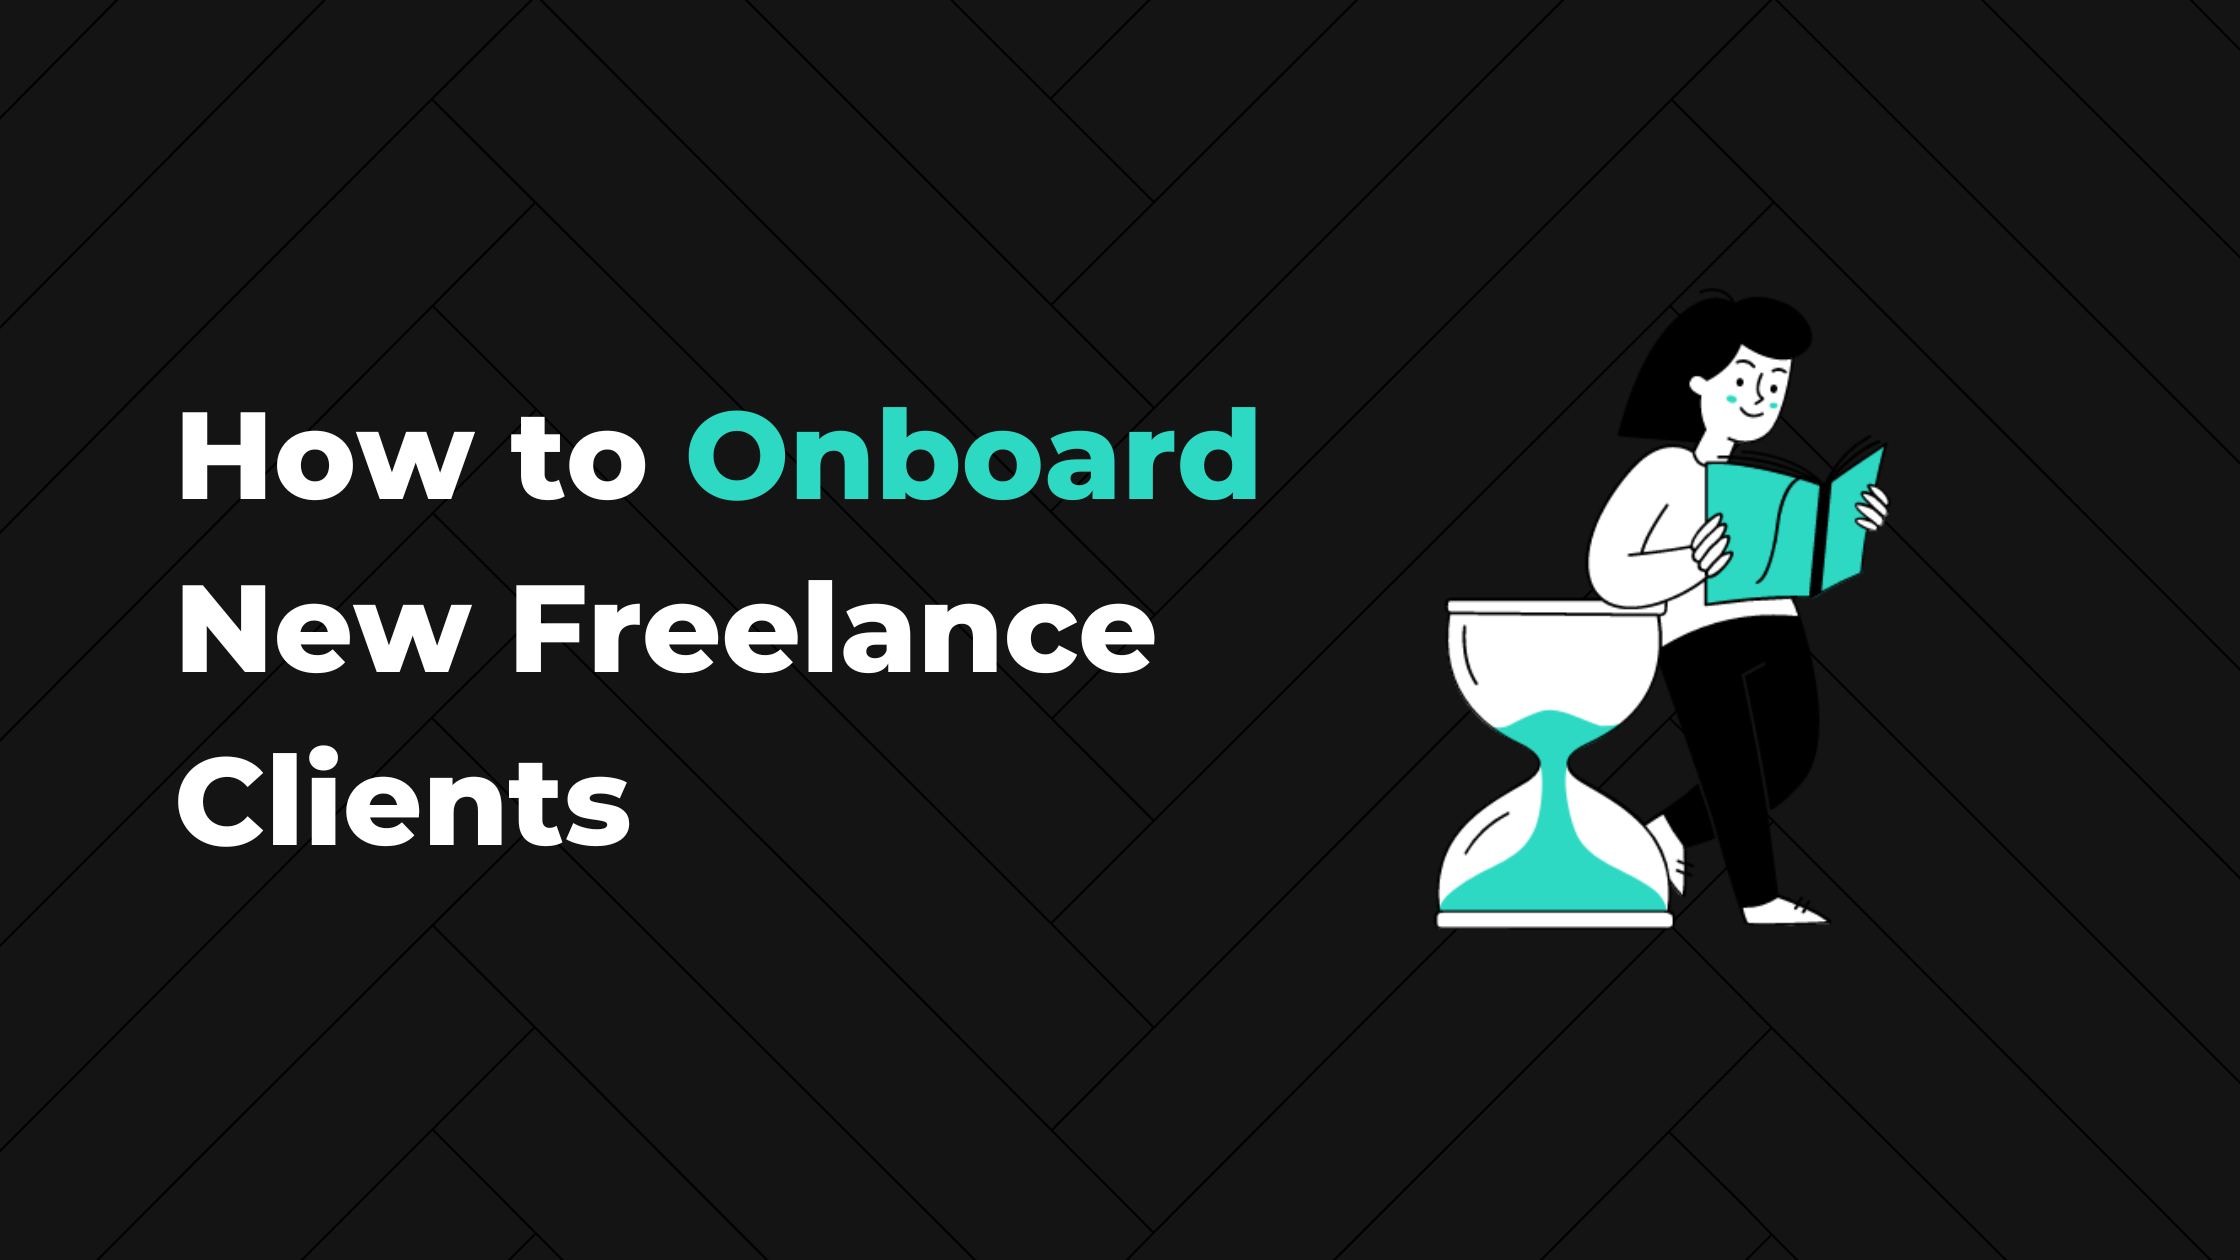 How to Onboard New Freelance Clients: 6 Ways to Get New Clients Up to Speed—Fast